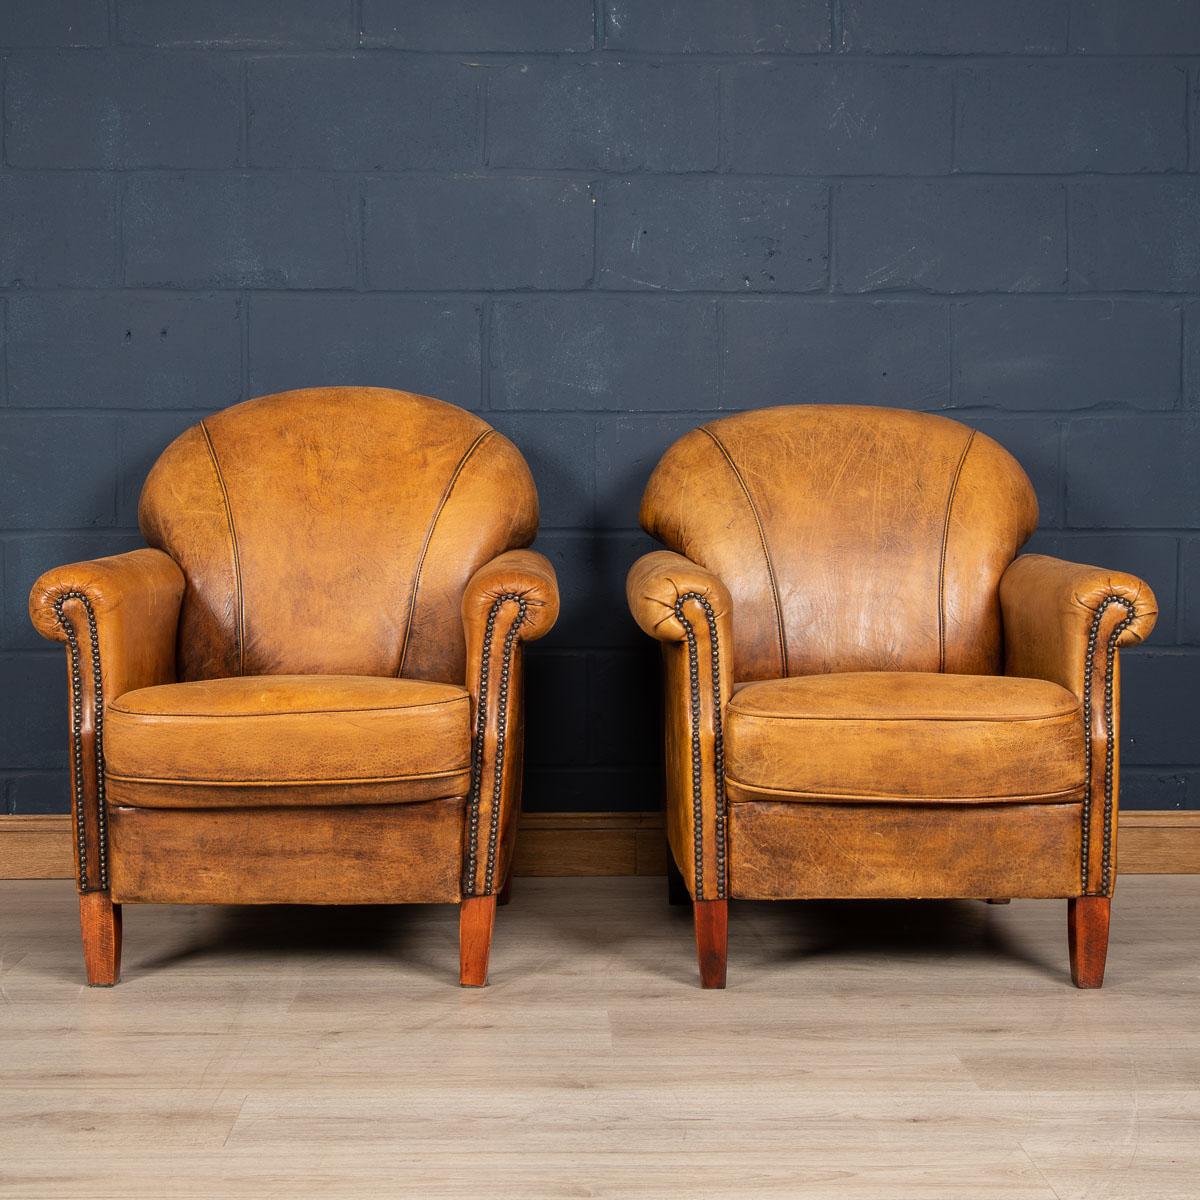 Showing superb patina and color, this wonderful pair of club chairs were hand upholstered sheepskin leather in Holland by the finest craftsmen. Fantastic look for any interior, both modern and traditional.

Please note that our interior pieces are